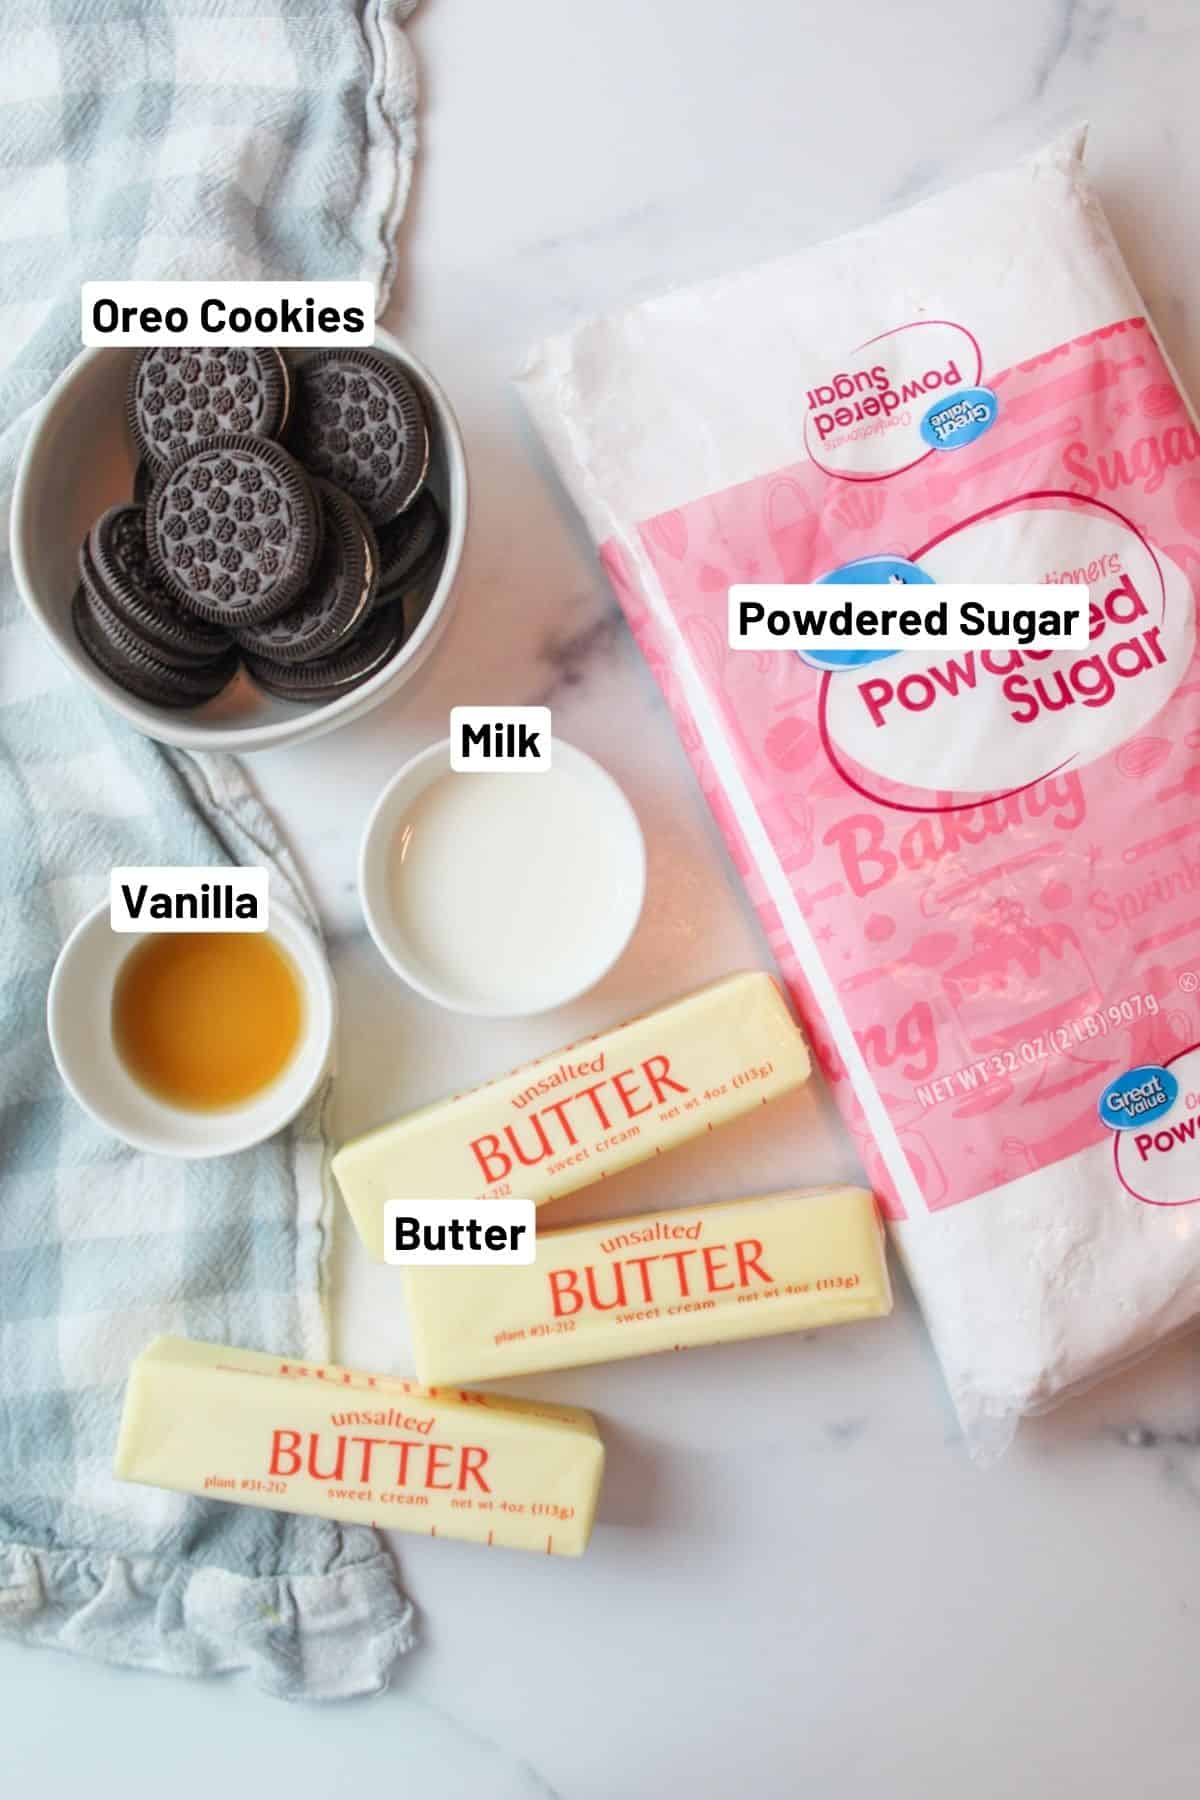 labeled ingredients needed to make oreo buttercream frosting